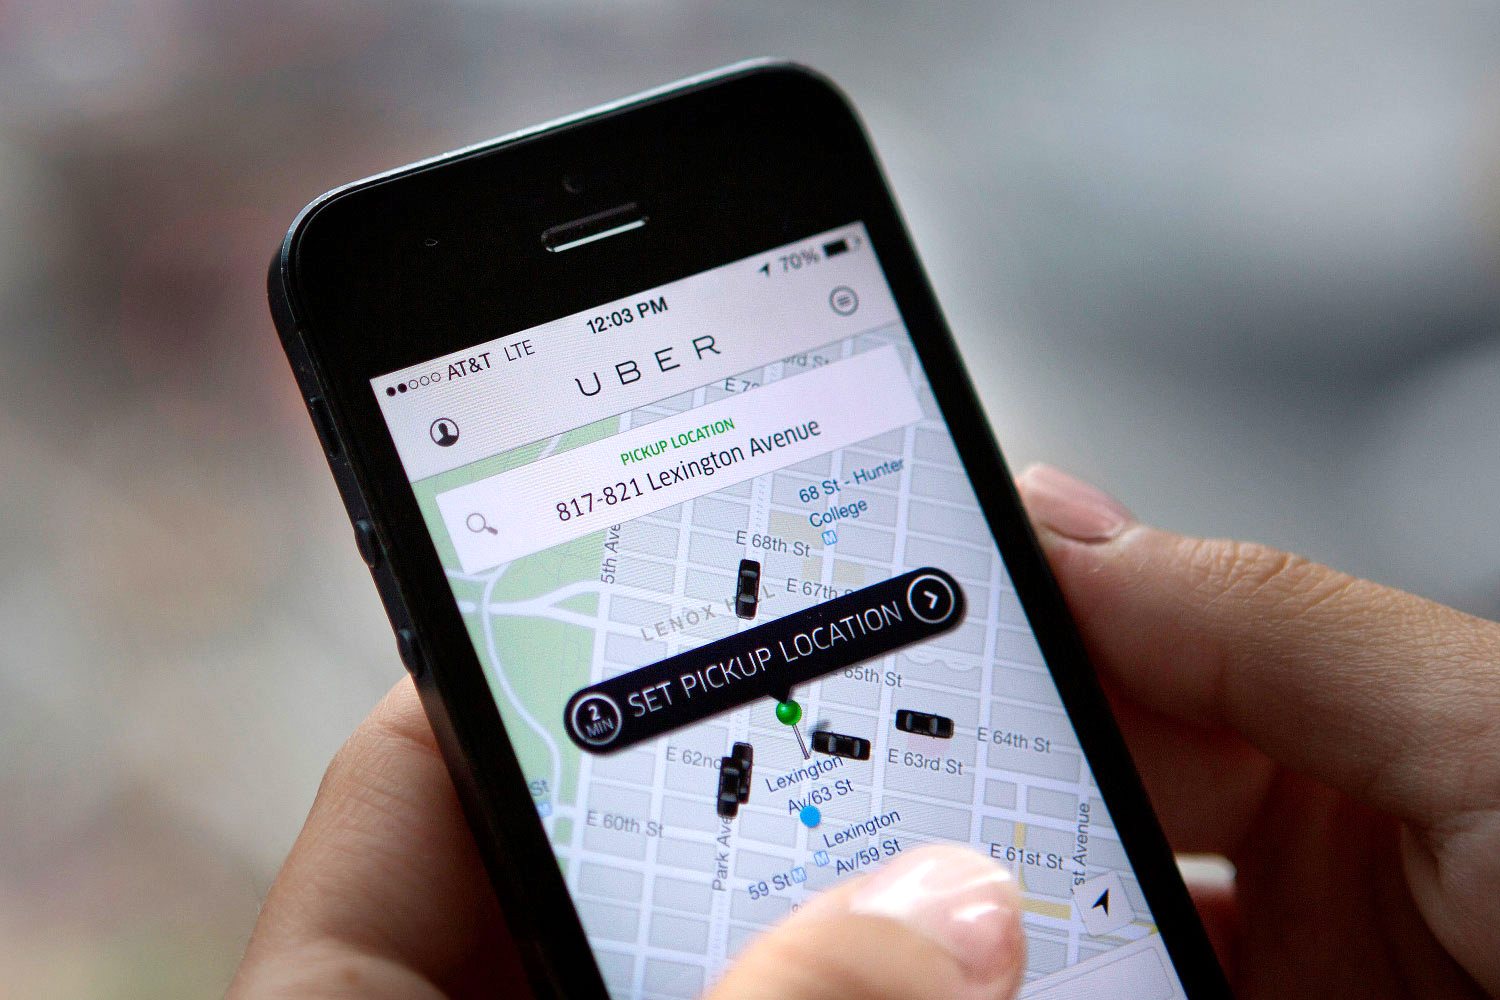 US judge says former Uber security chief must face wire fraud charges over hacking coverup